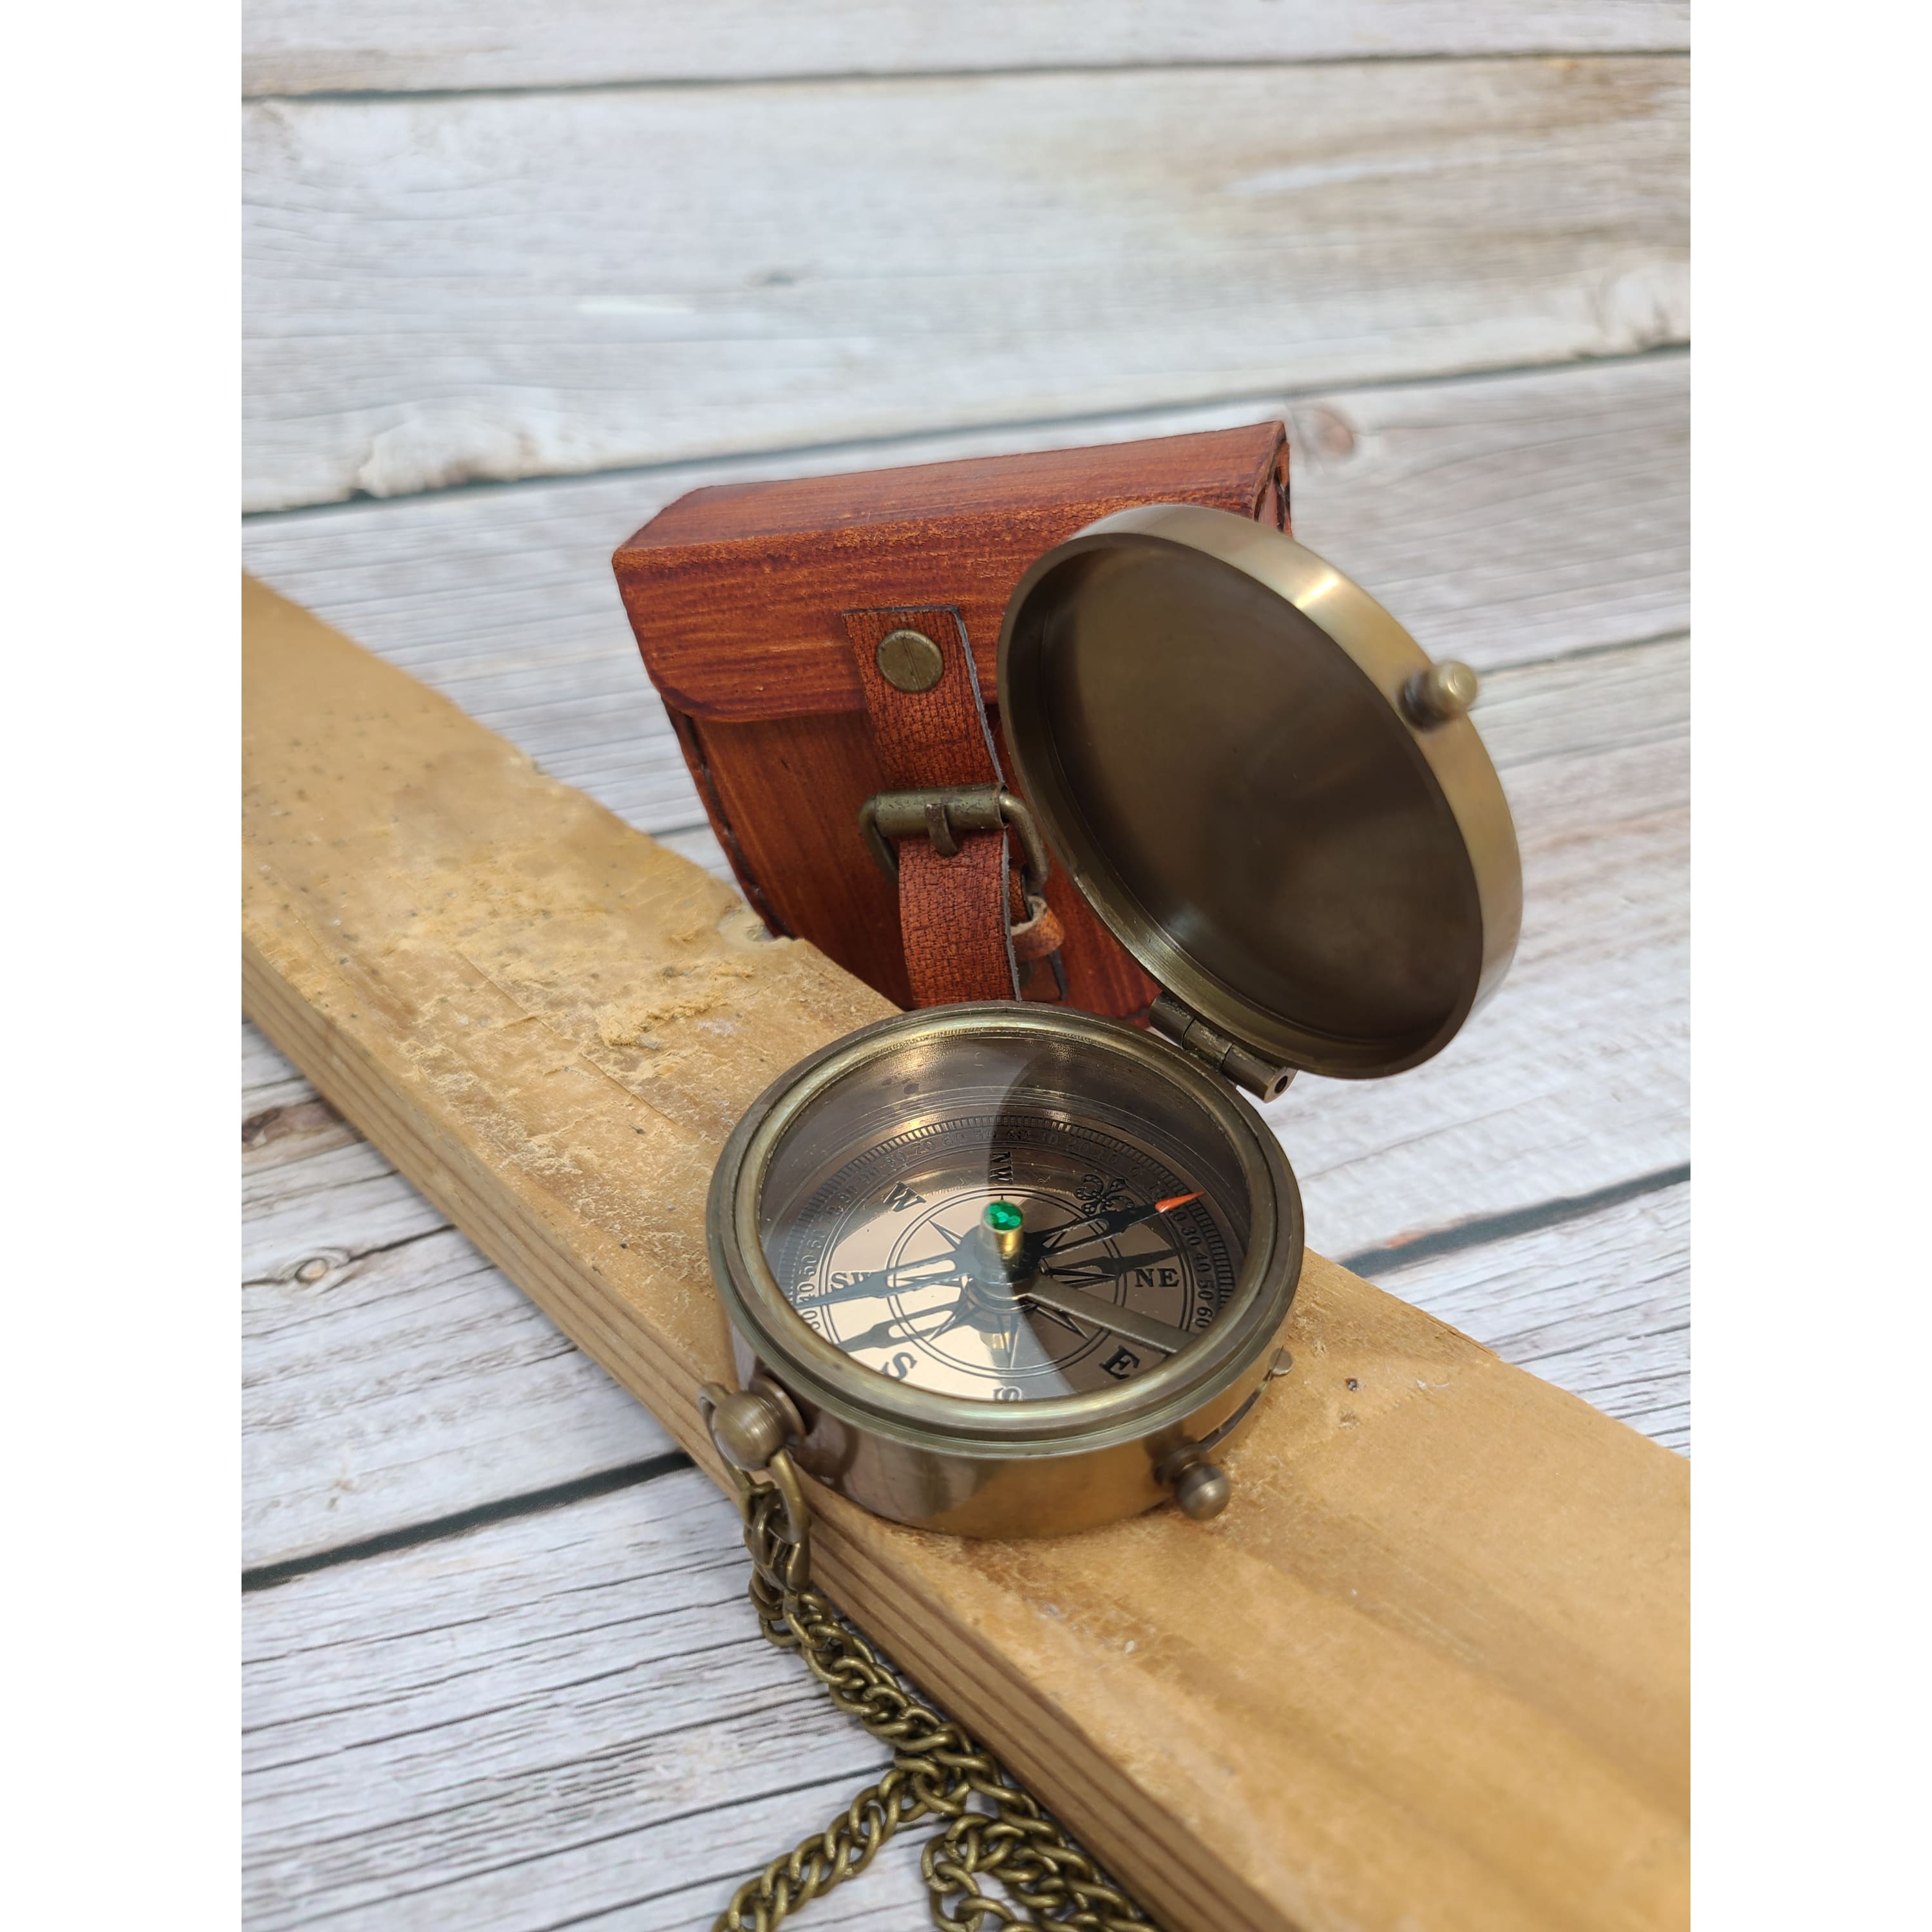 Antique Compass, Compass in Leather Pouch, Vintage Look Compass, Compass  with Chain, Pocket Compass